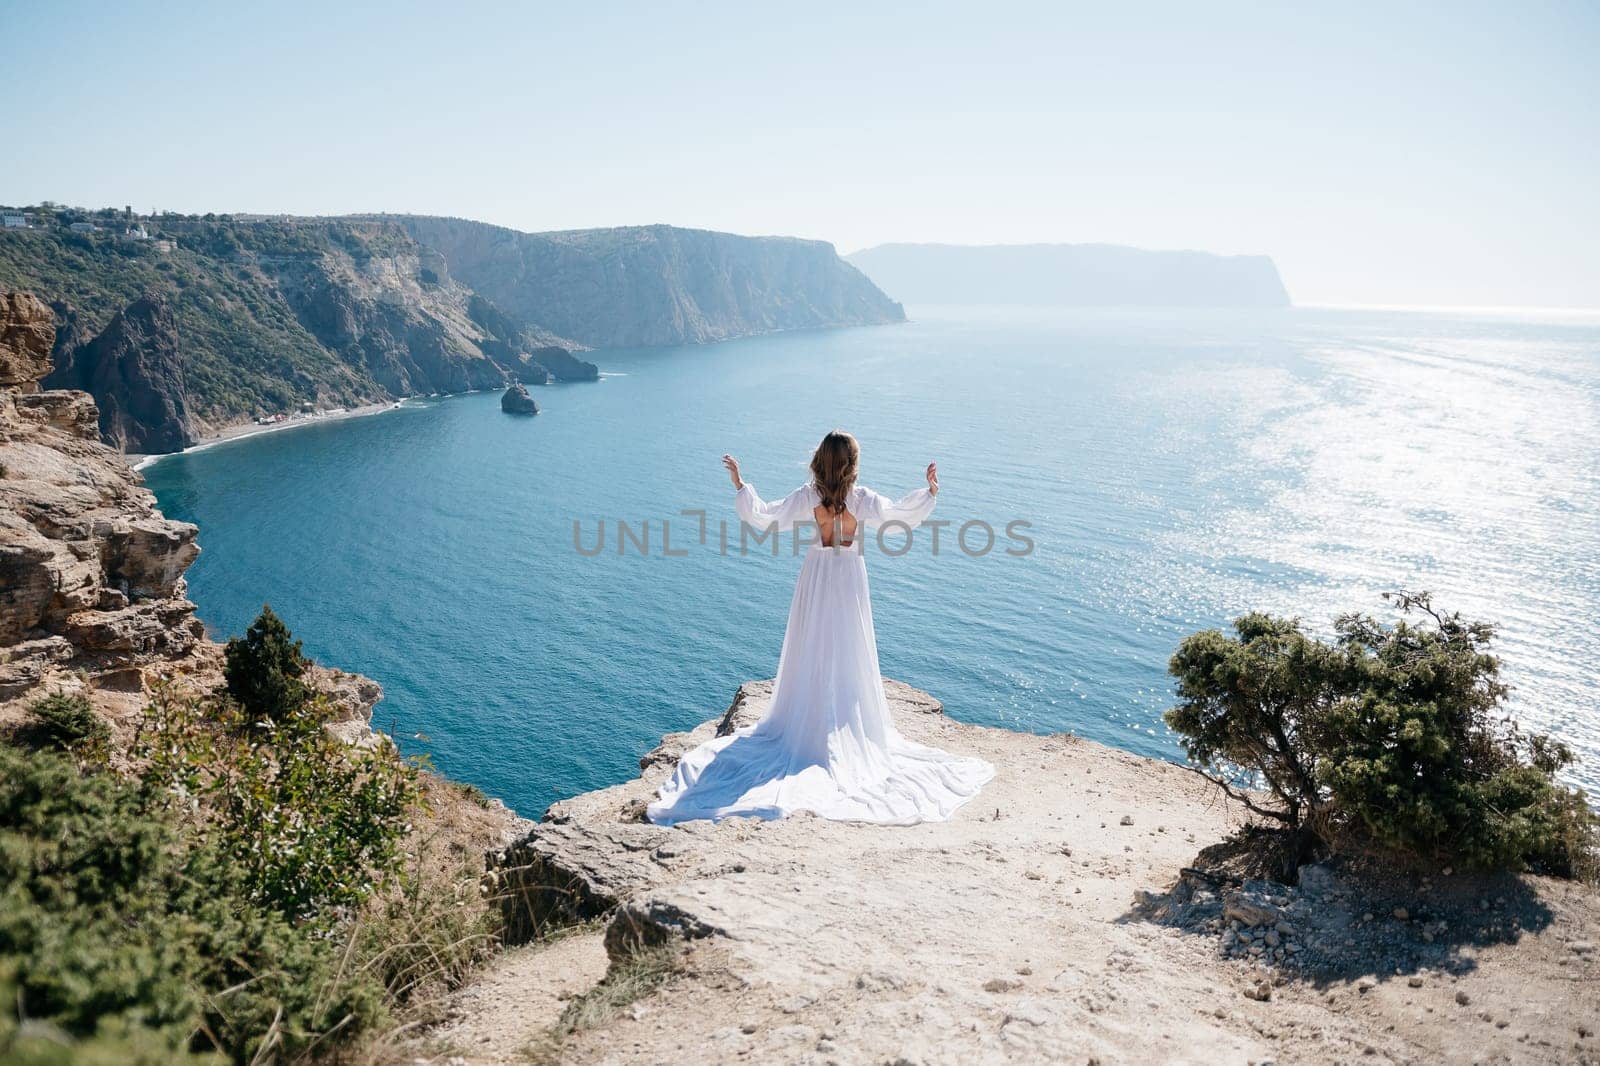 A woman stands on a cliff overlooking the ocean in a white dress. She is looking out at the water and she is in a state of peace and serenity. Concept of calm and tranquility